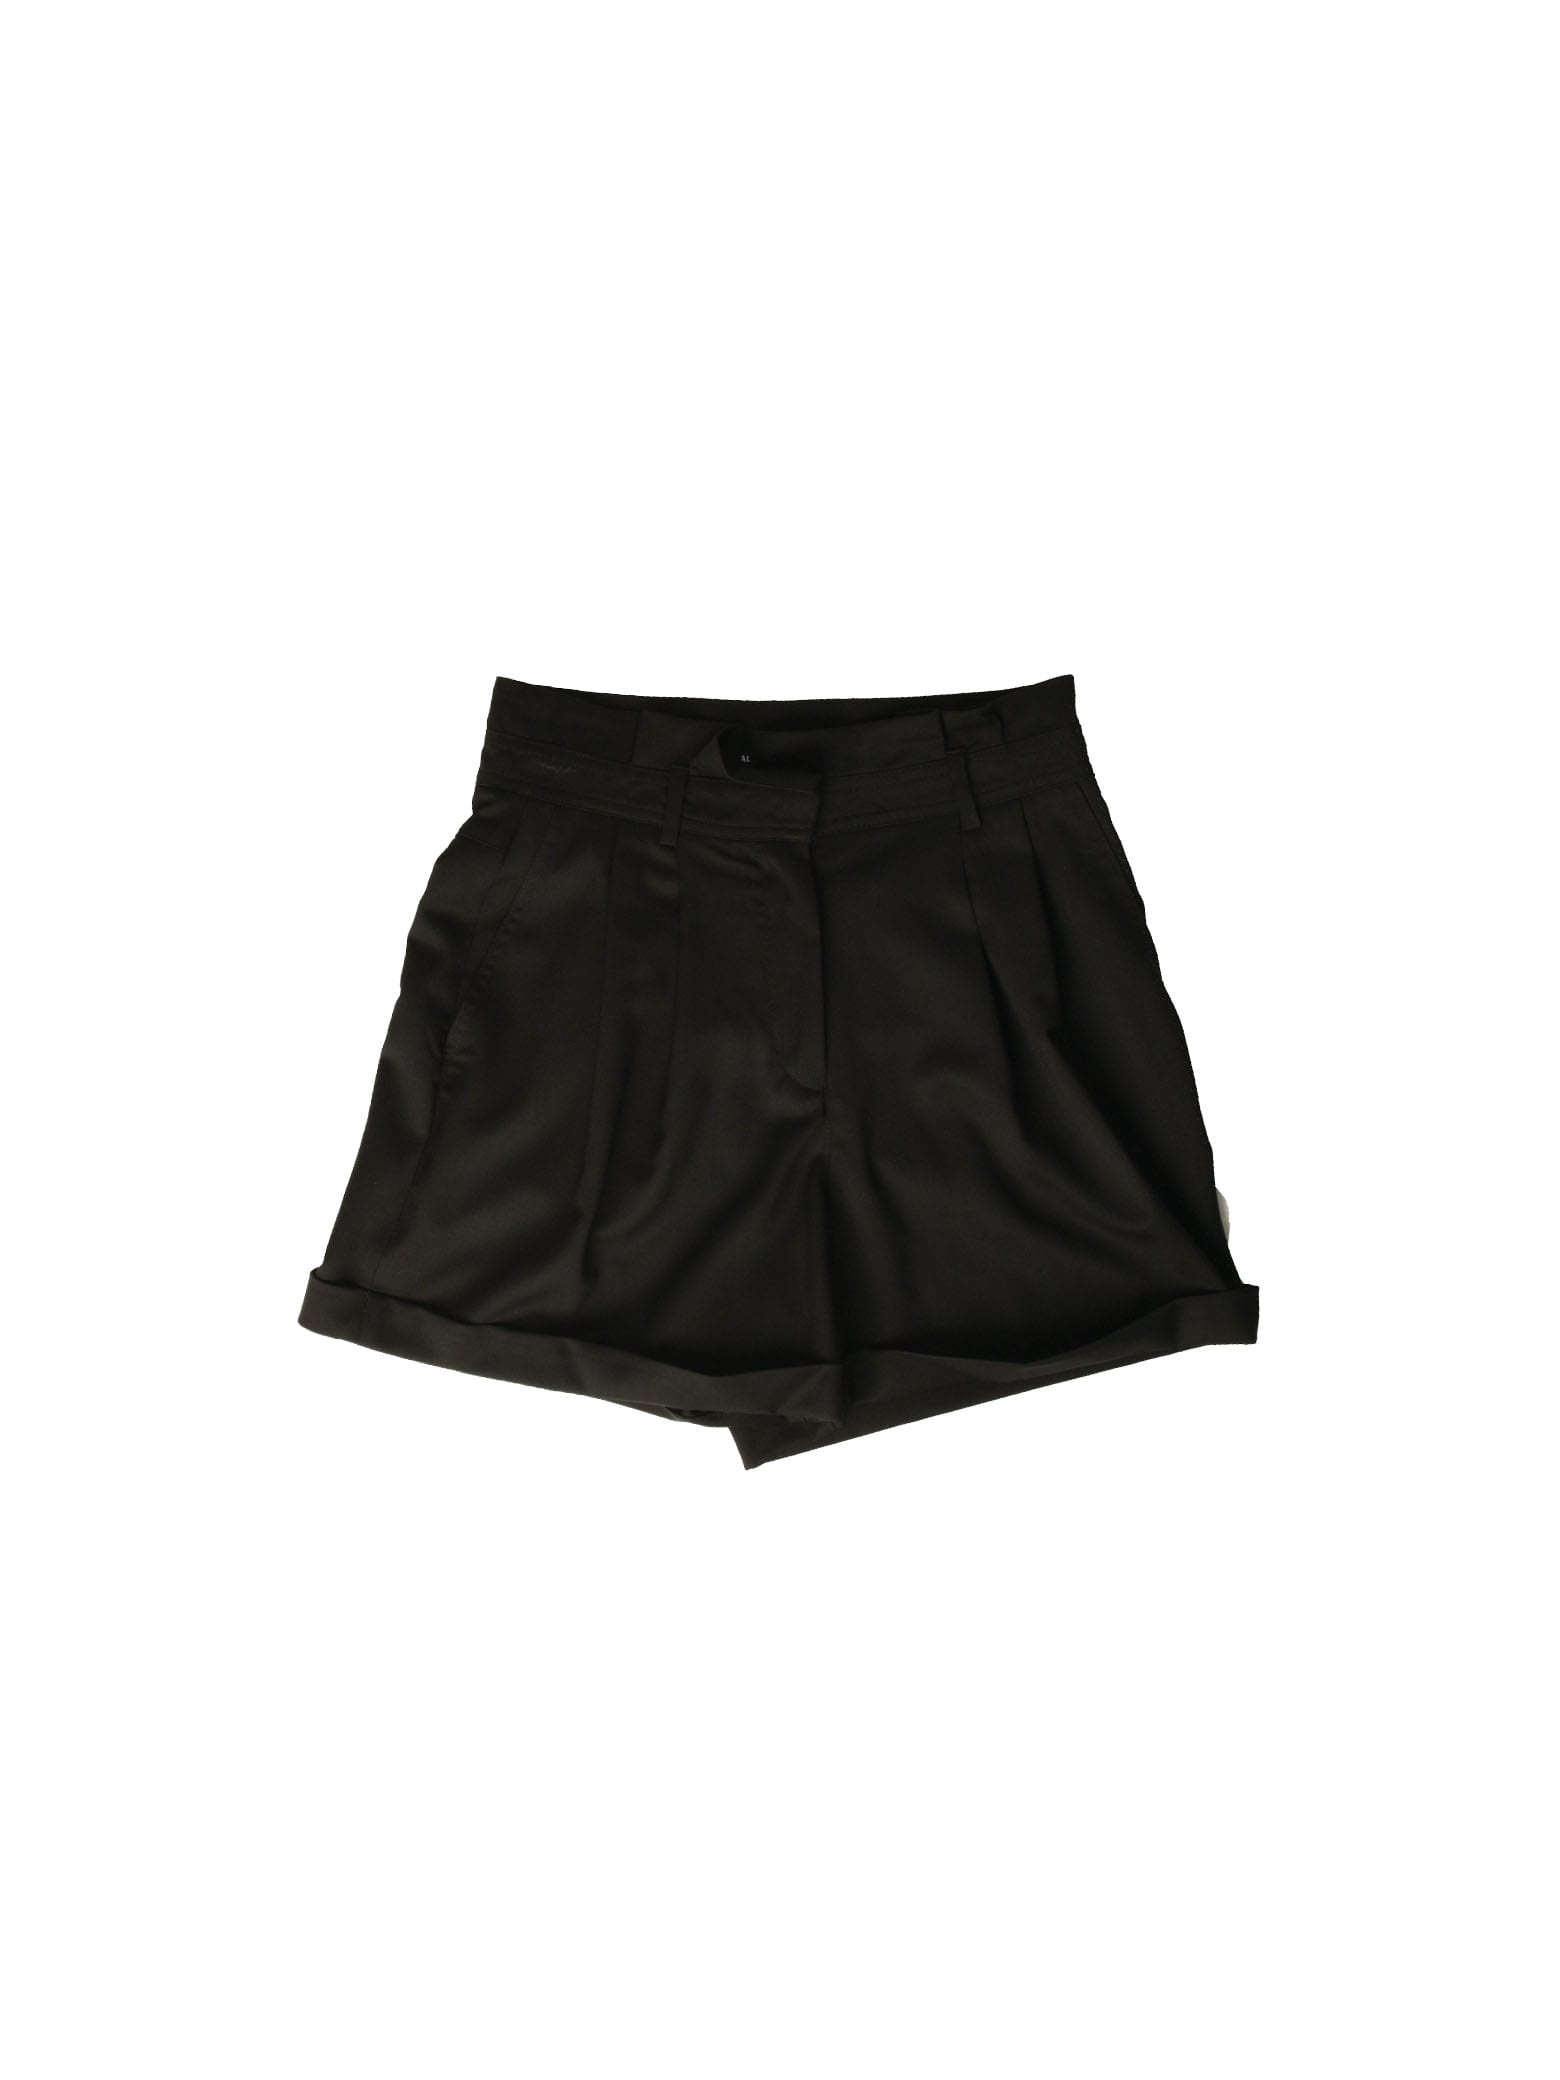 Balmain Black Shorts With Gold Belt And Buckle